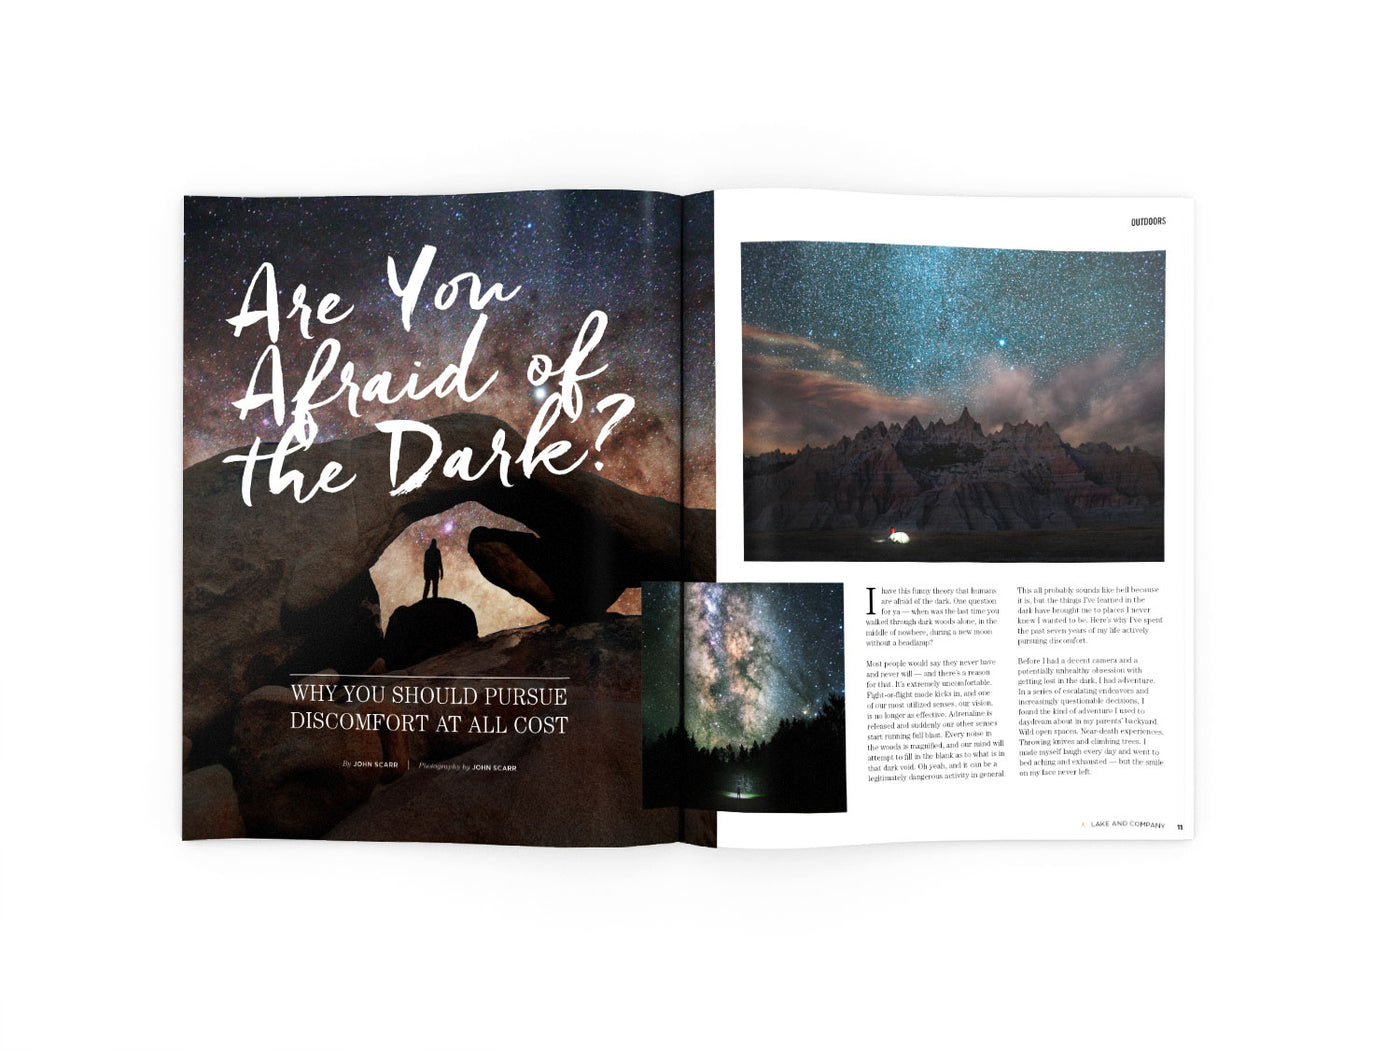 Lake and Company National Issue 01 - Are You Afraid of the Dark?